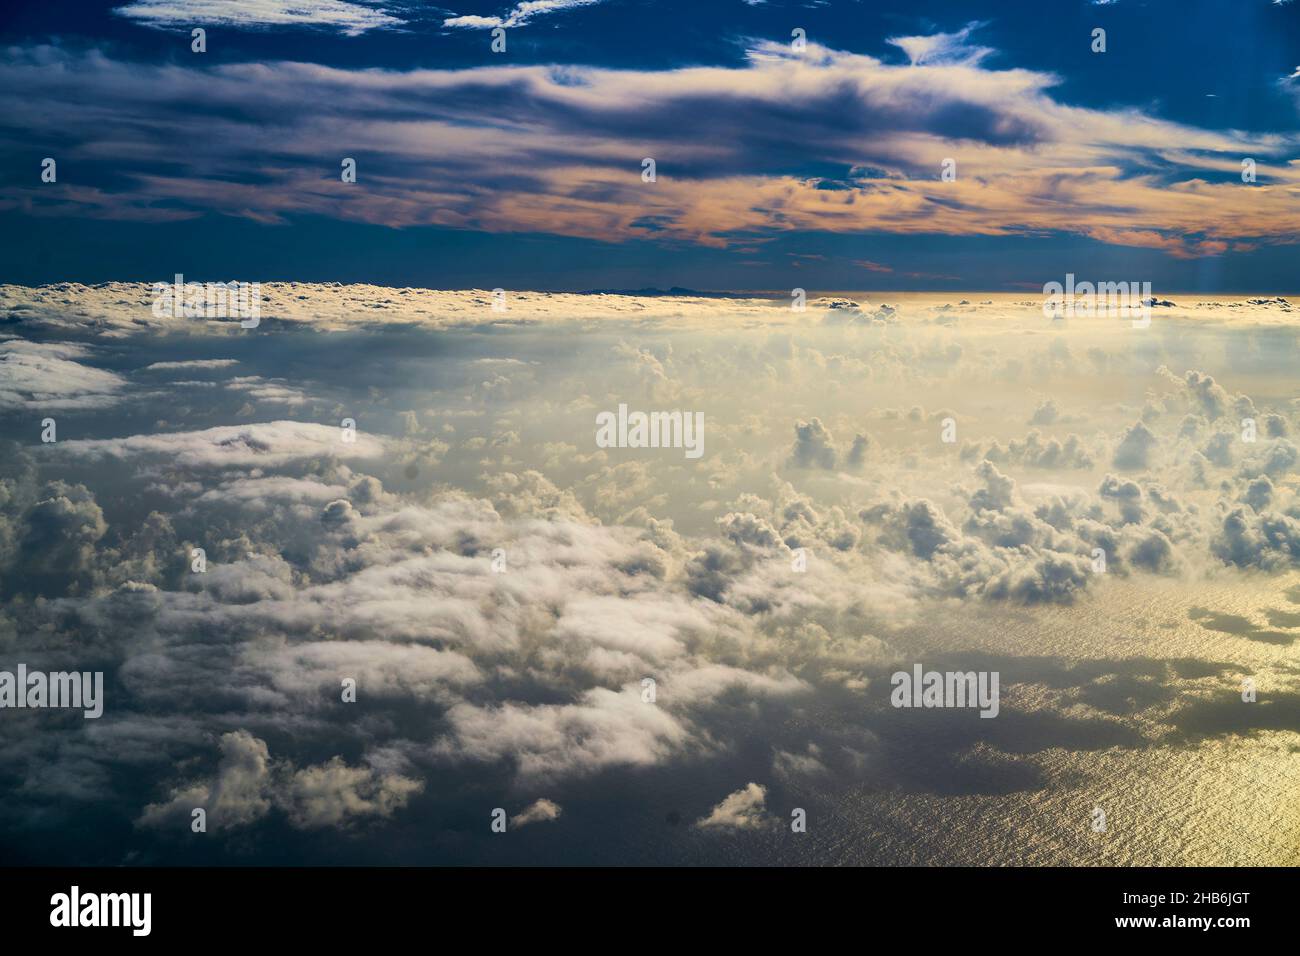 Cirrus clouds over a low cloud cover over the Atlantic Ocean, Canary Islands, Atlantic Ocean Stock Photo